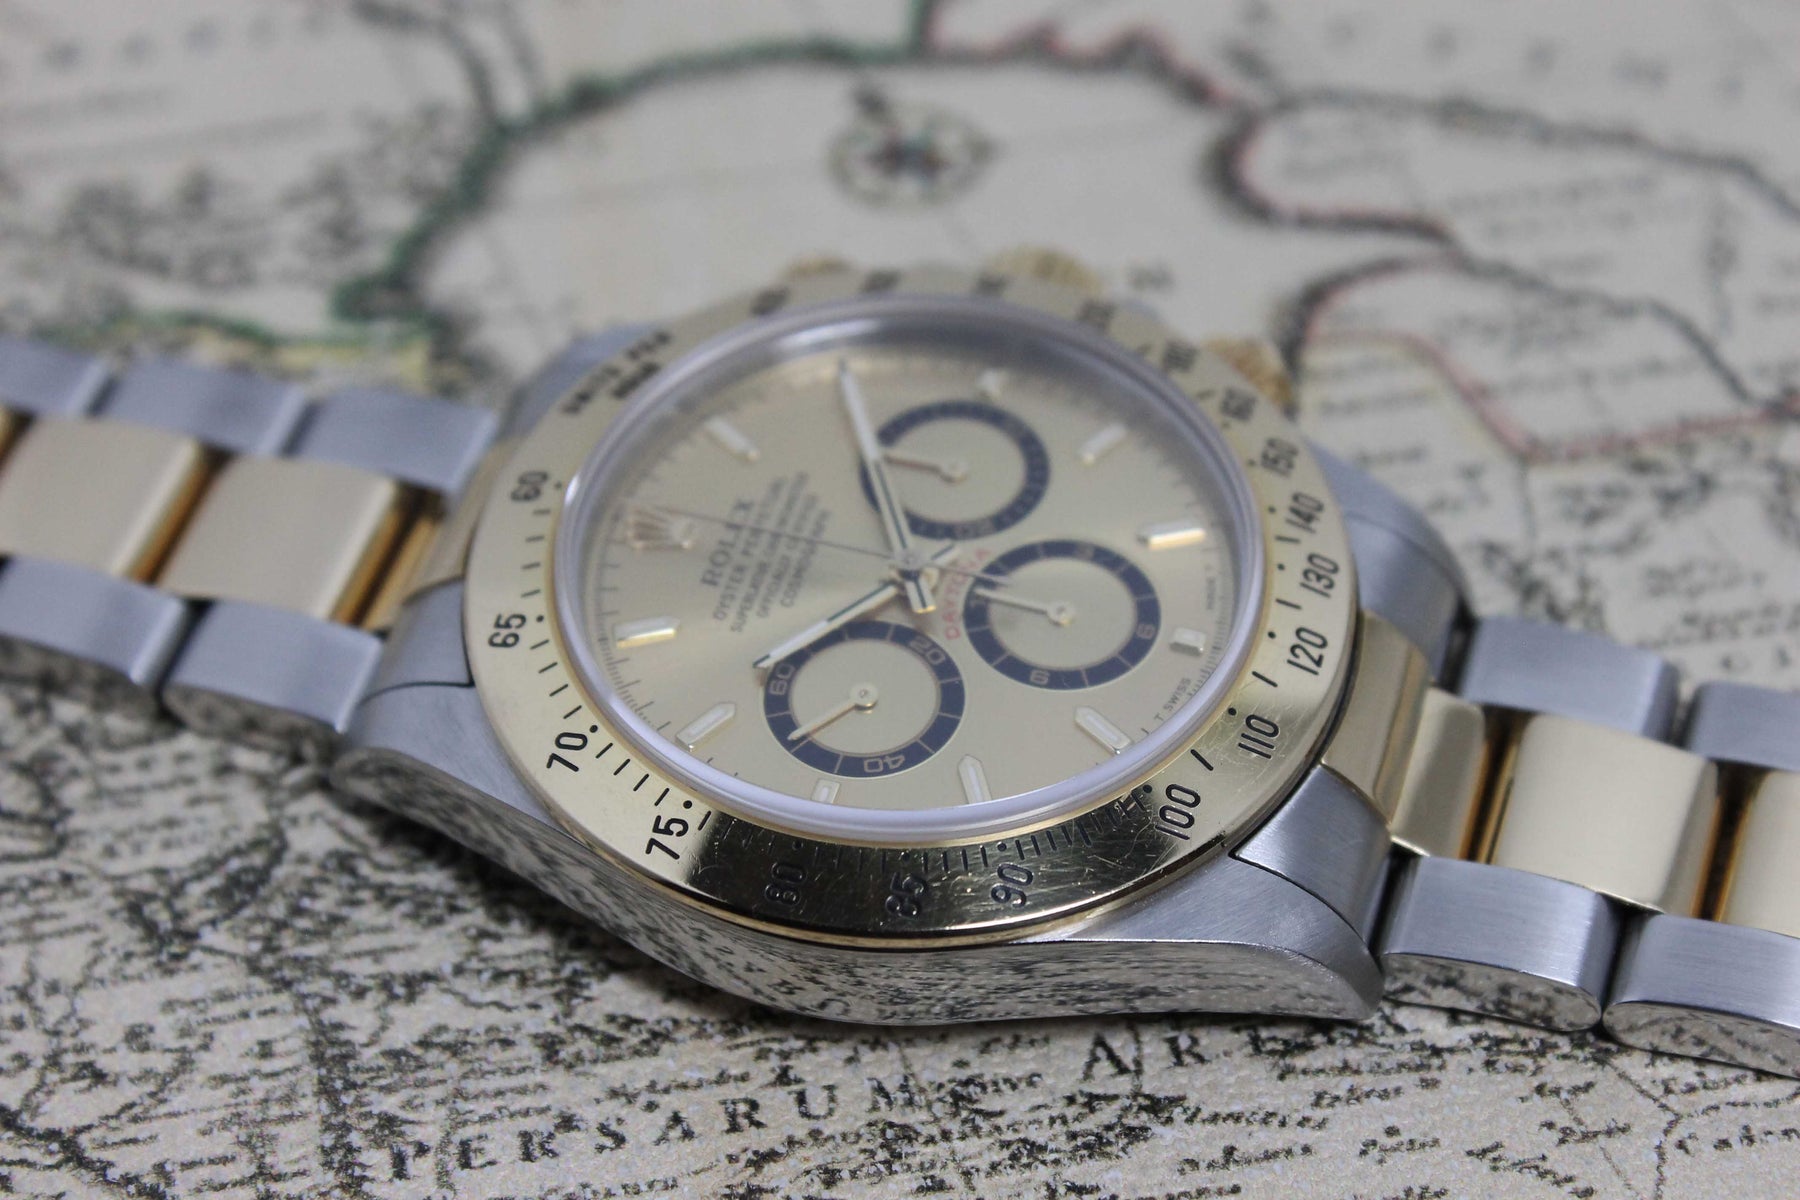 1996 Rolex Daytona St/G Ref. 16523 (with Papers)